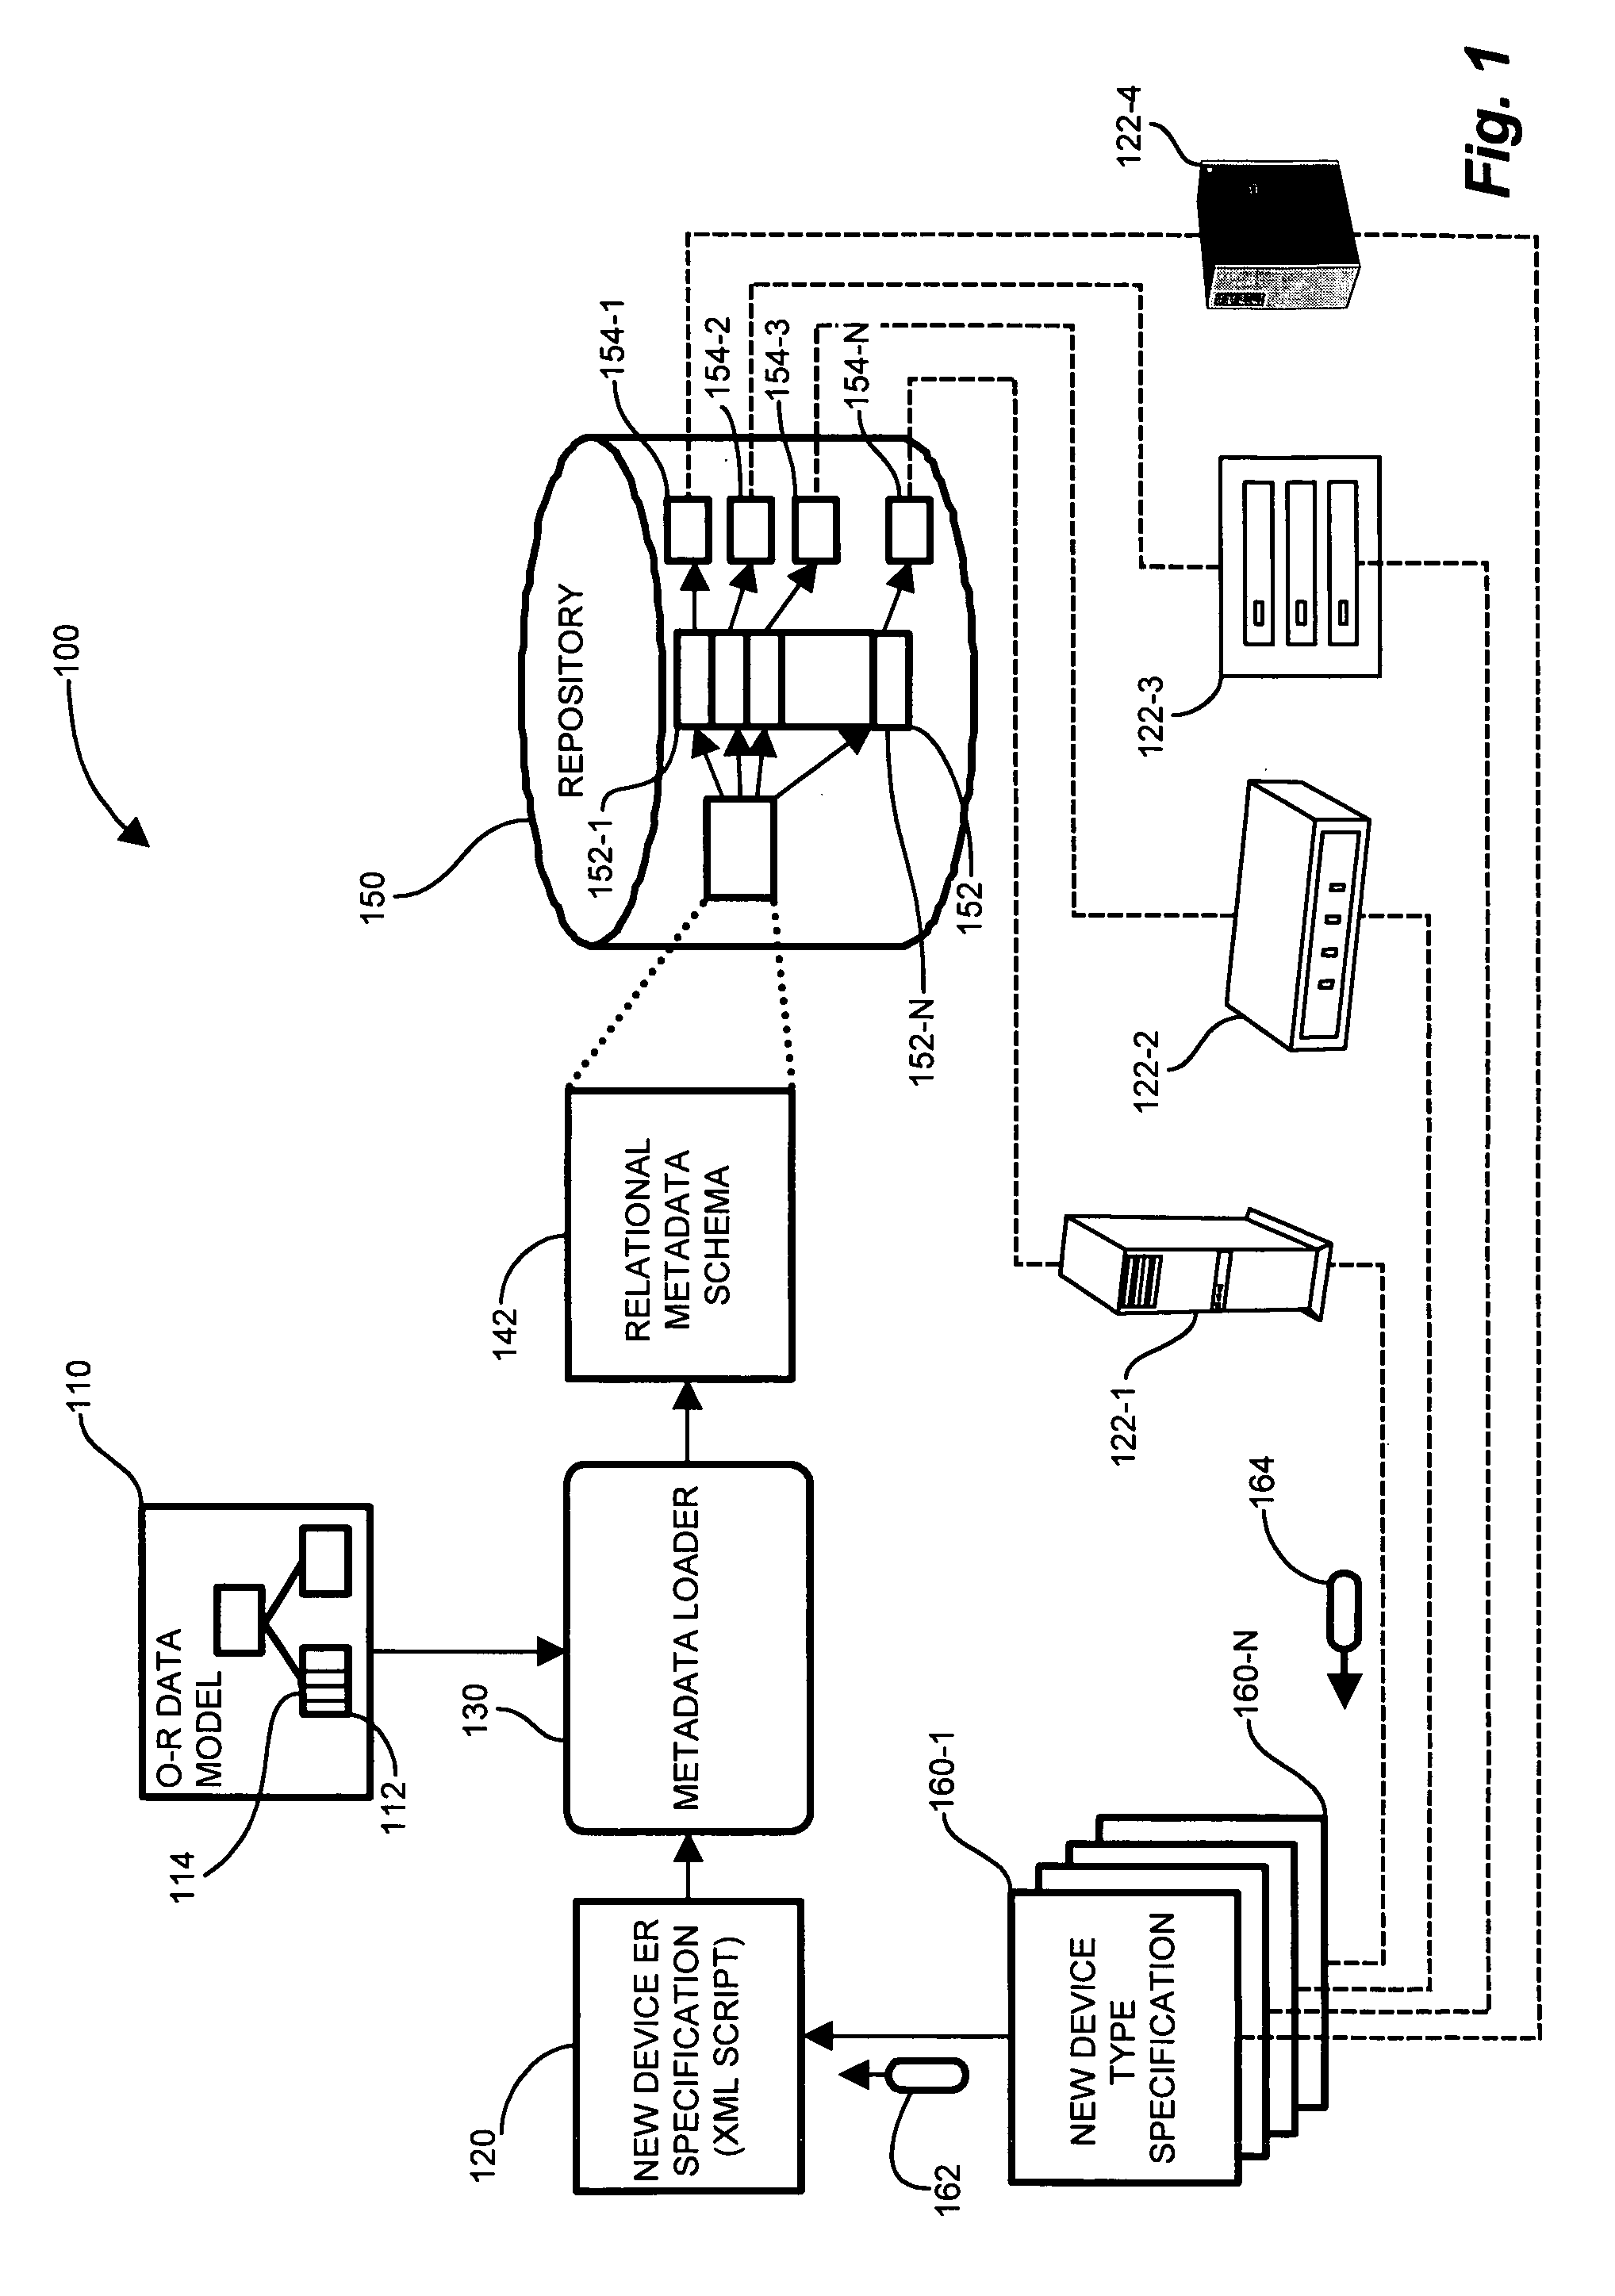 System and method for an extensible metadata driven application framework